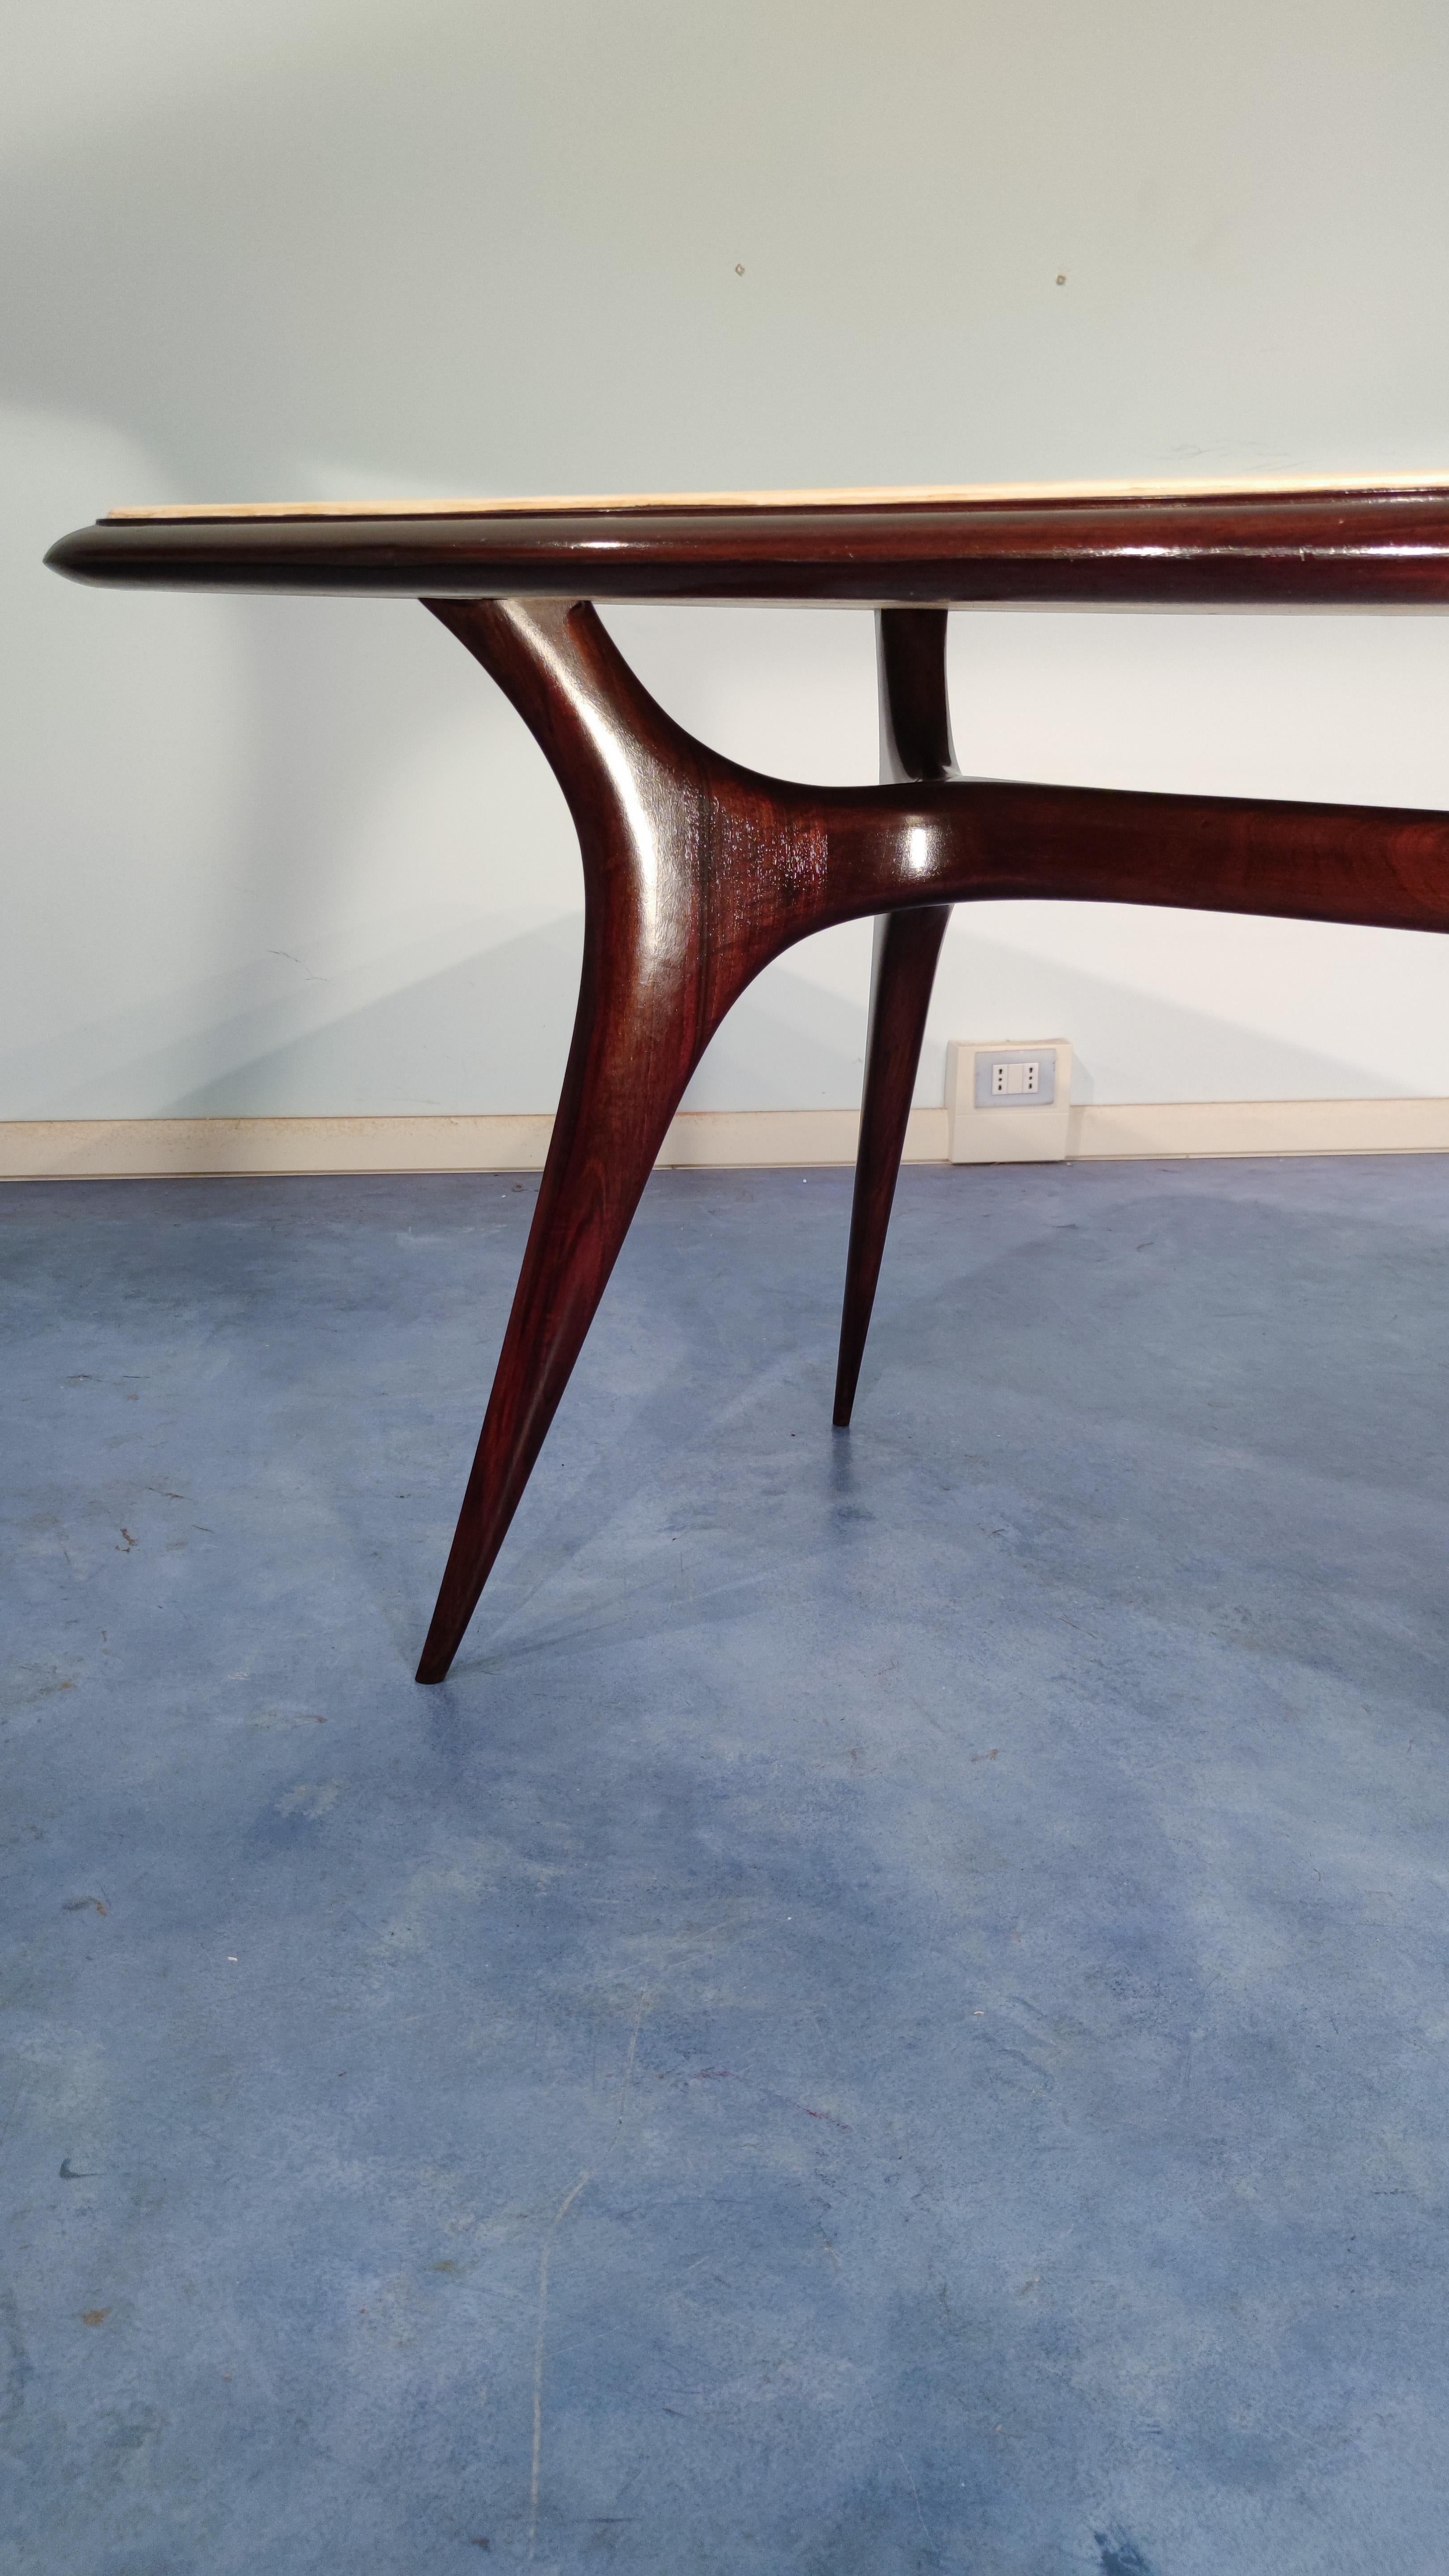 Italian Mid-Century Parchment Dining Table Attributed to Guglielmo Ulrich, 1950s For Sale 3